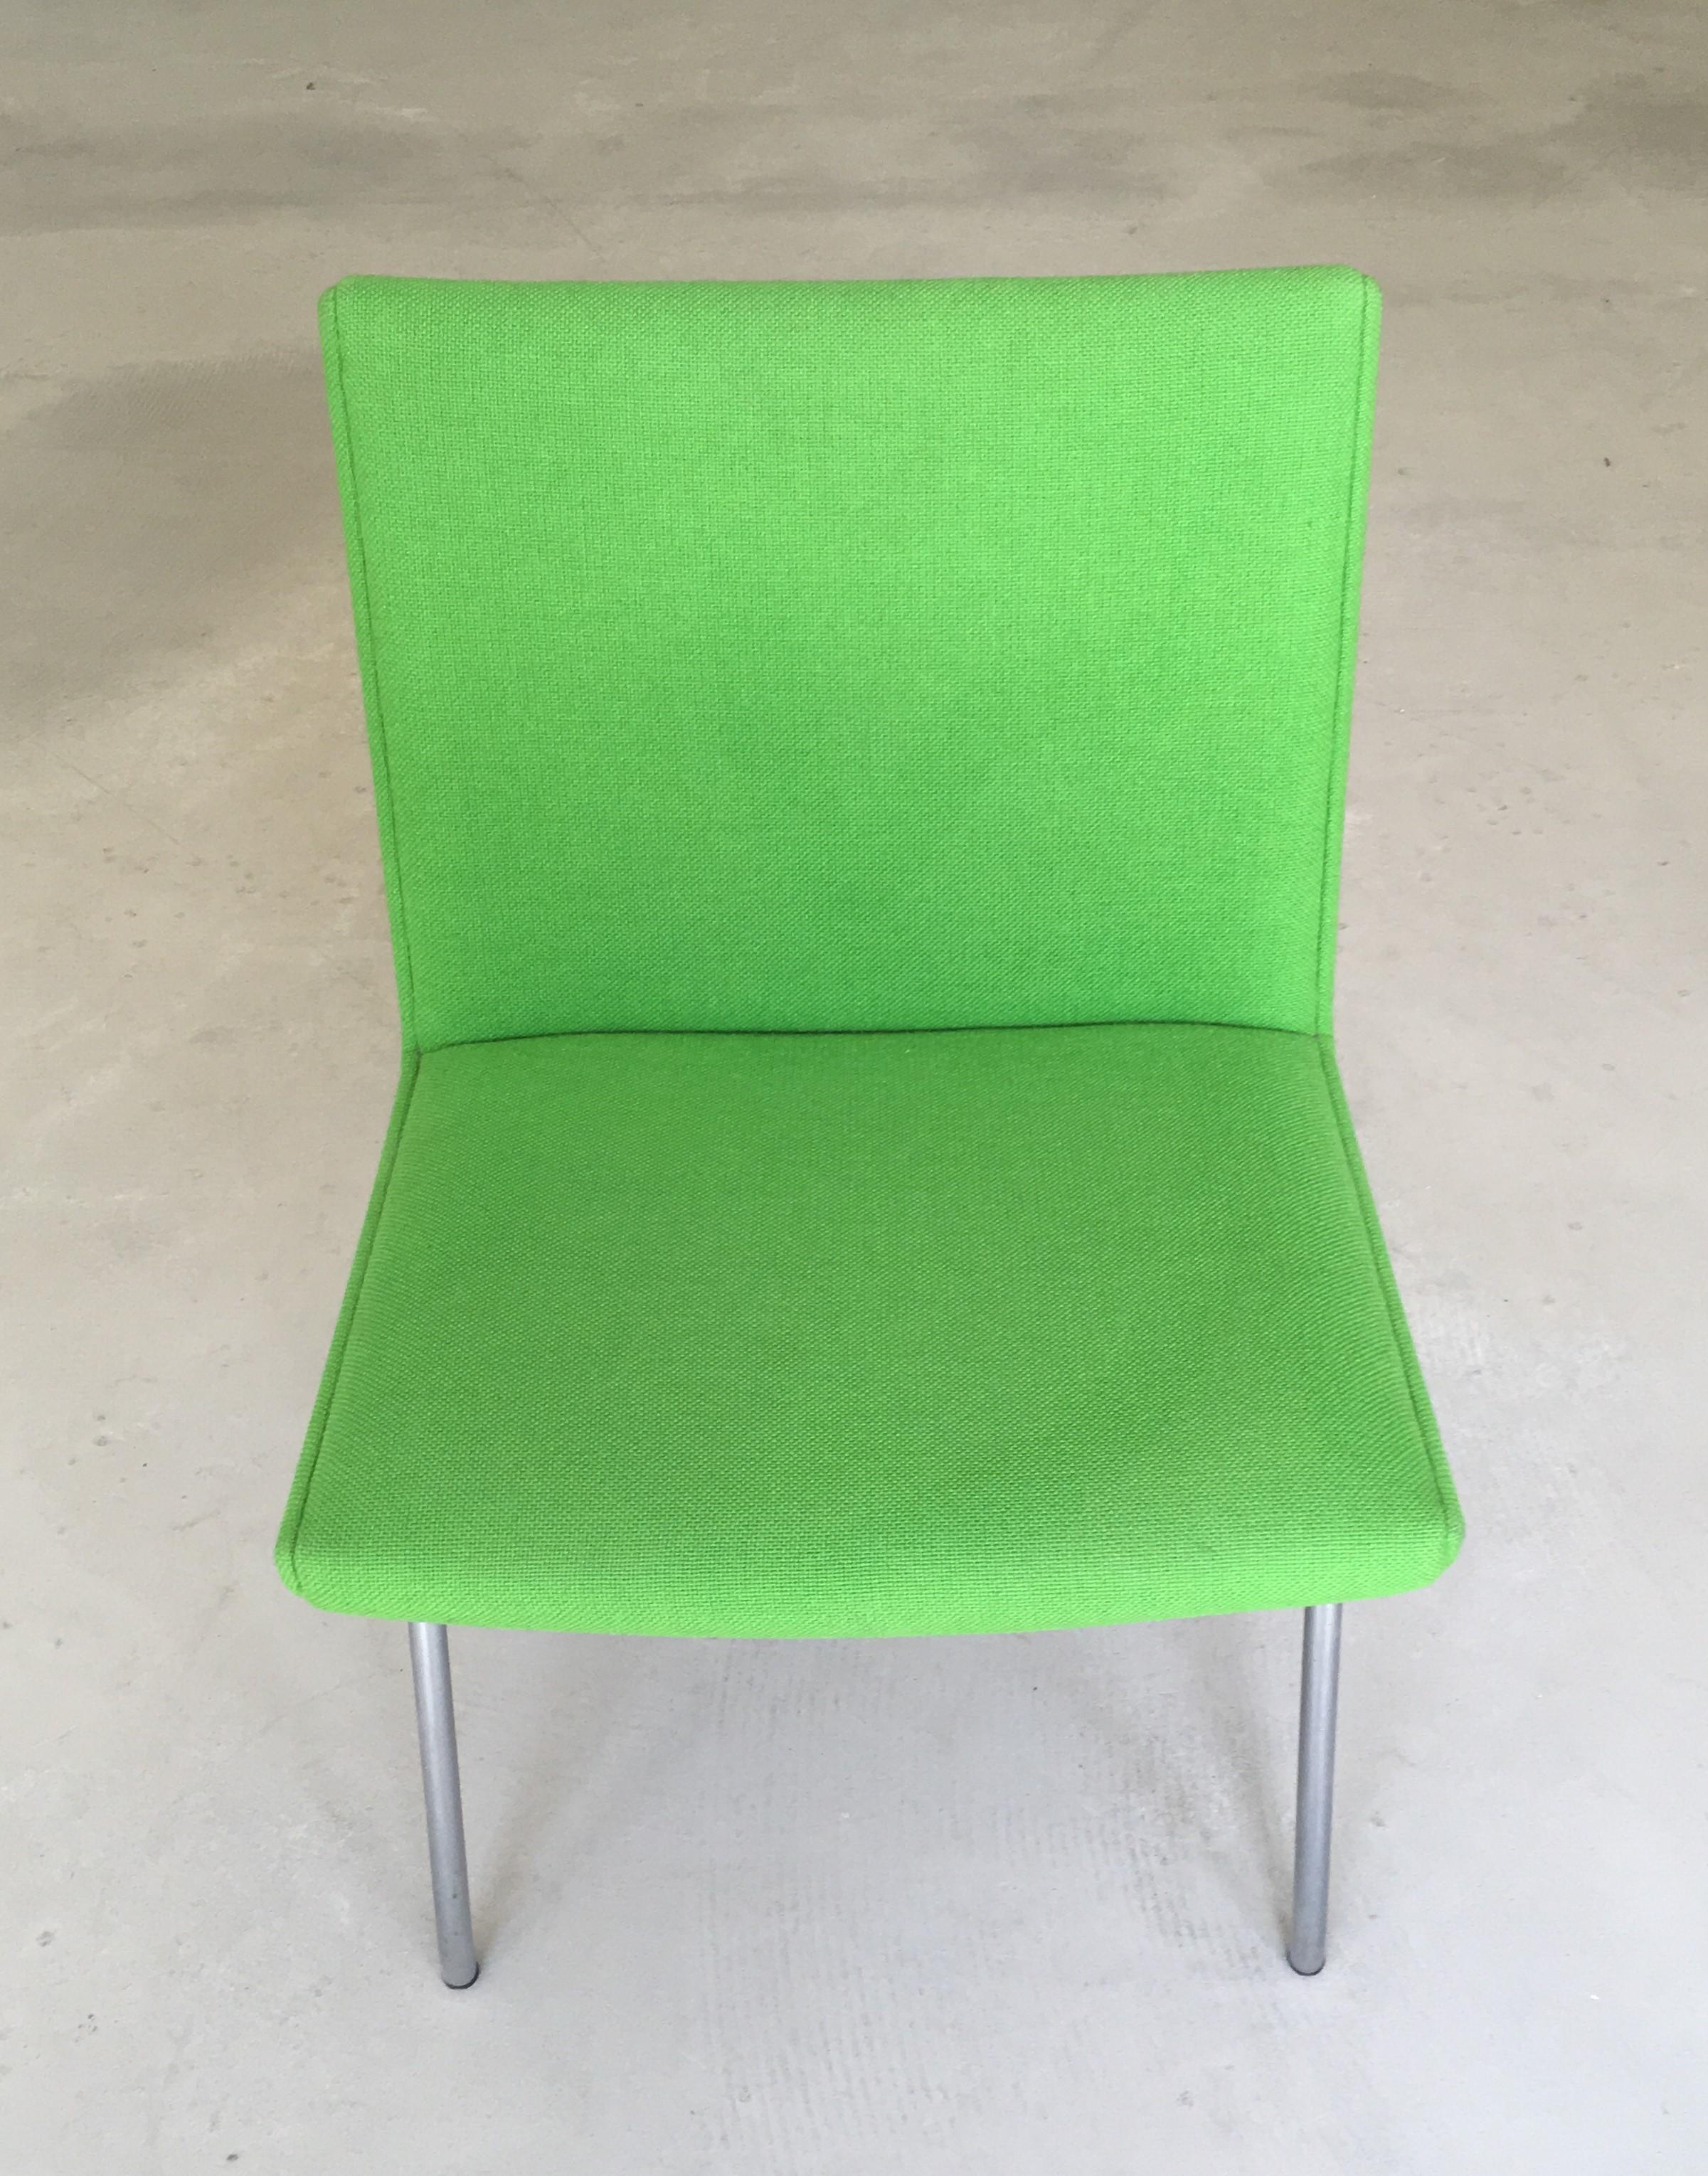 Hans Wegner AP38 'Airport' chair by A.P. Stolen.

Danish Hans J. Wegner Airport chair by AP. Stolen Reupholstered in Green Fabric

Exceptional modern chair. of it´s time Designed in 1958, on tubular-steel frames. Seat have been reupholstered